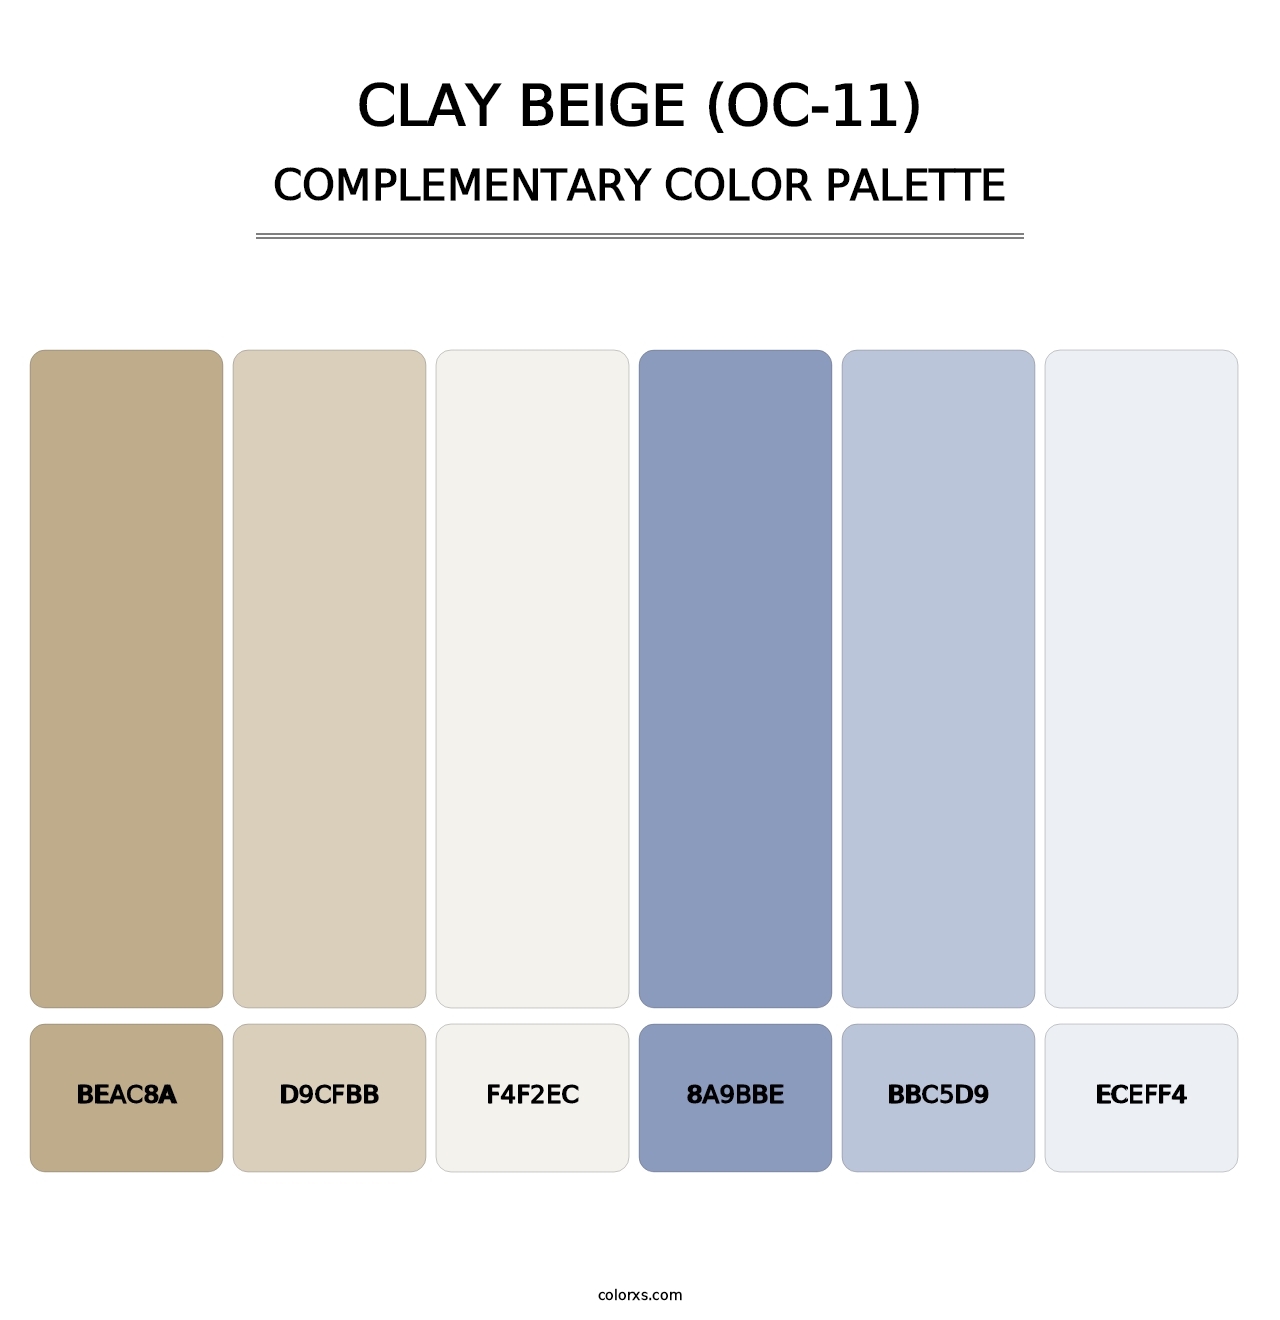 Clay Beige (OC-11) - Complementary Color Palette